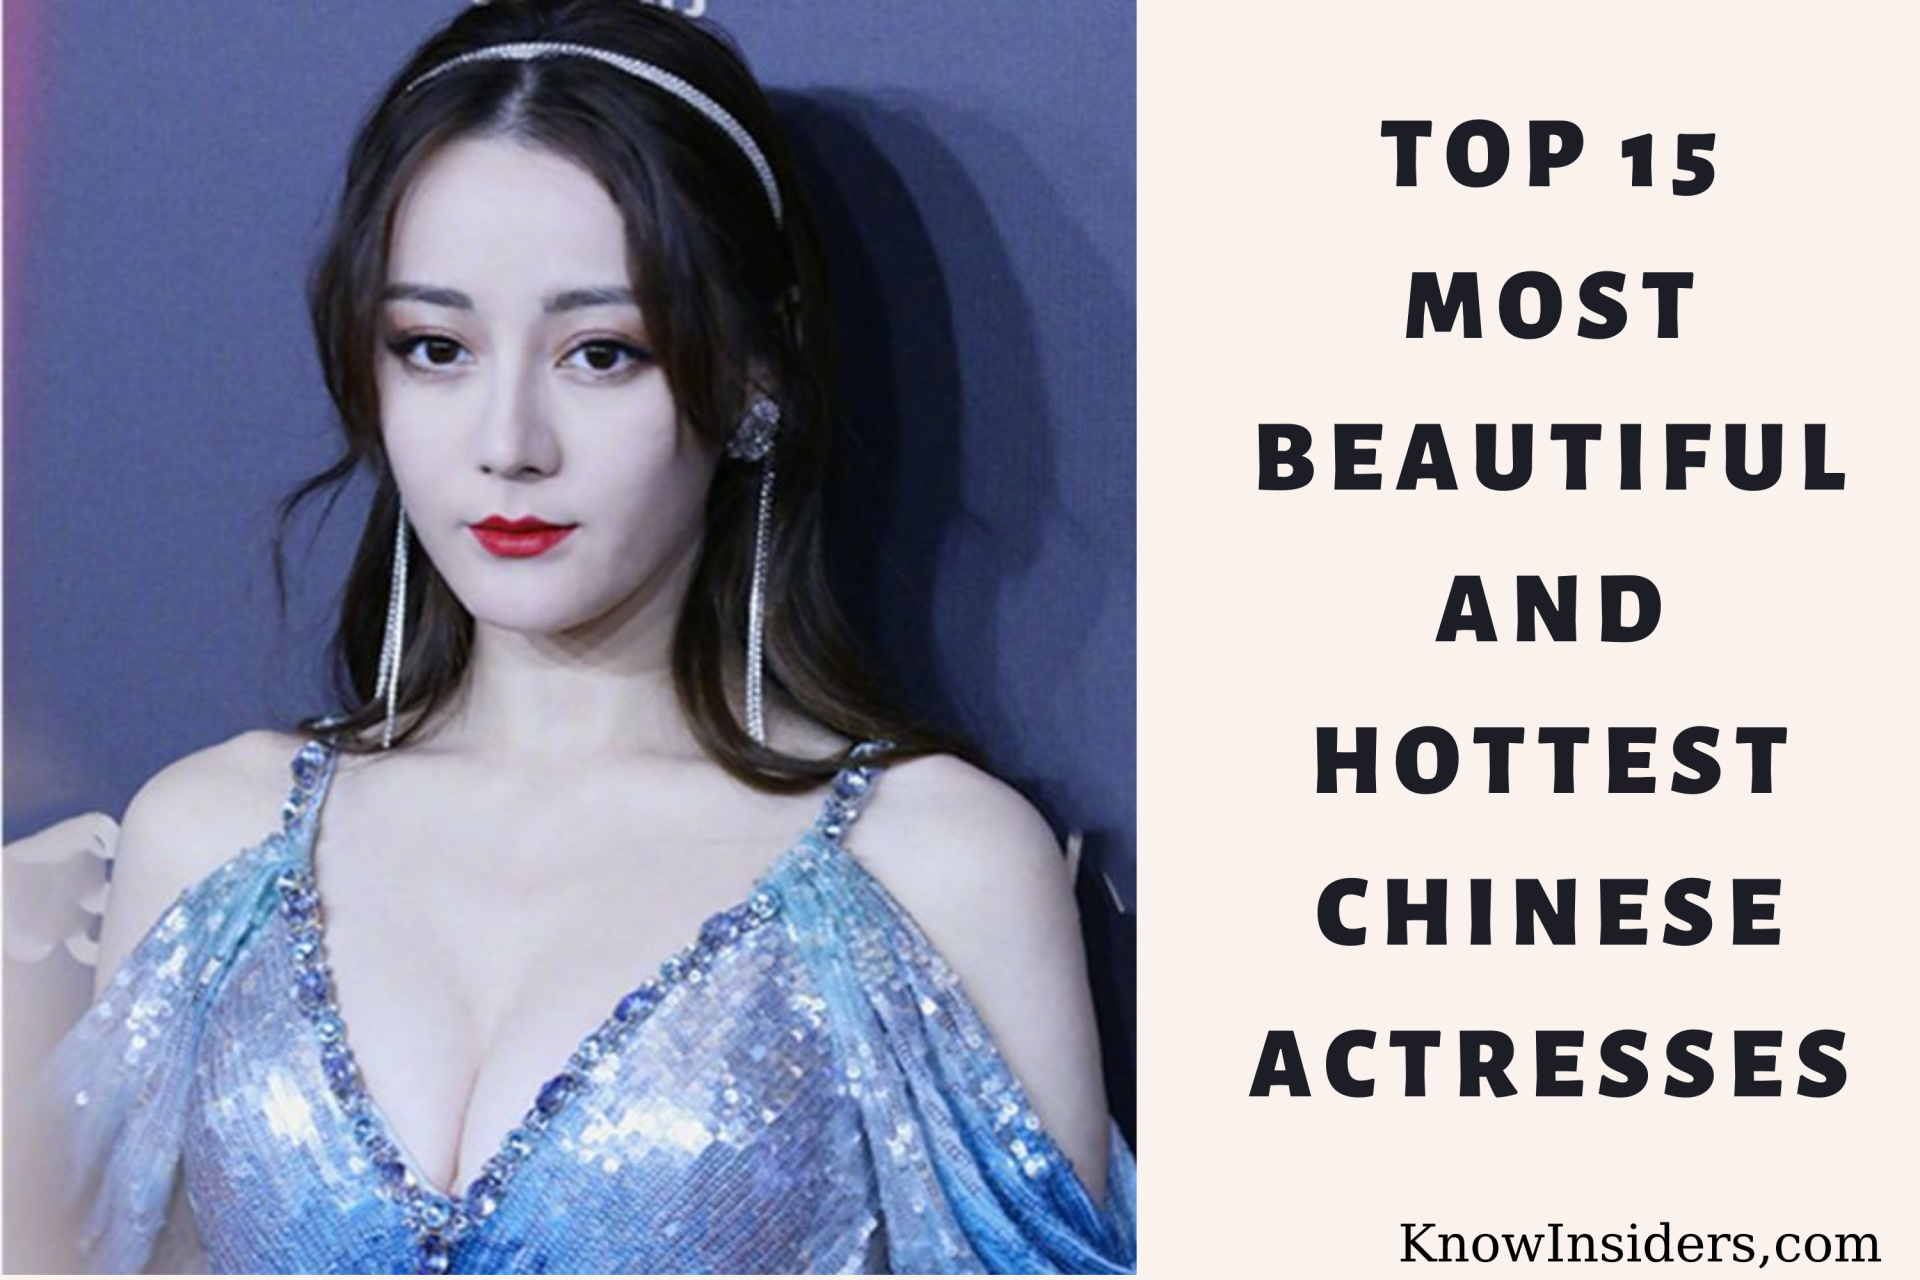 Top 15 Most Beautiful and Hottest Chinese Actresses